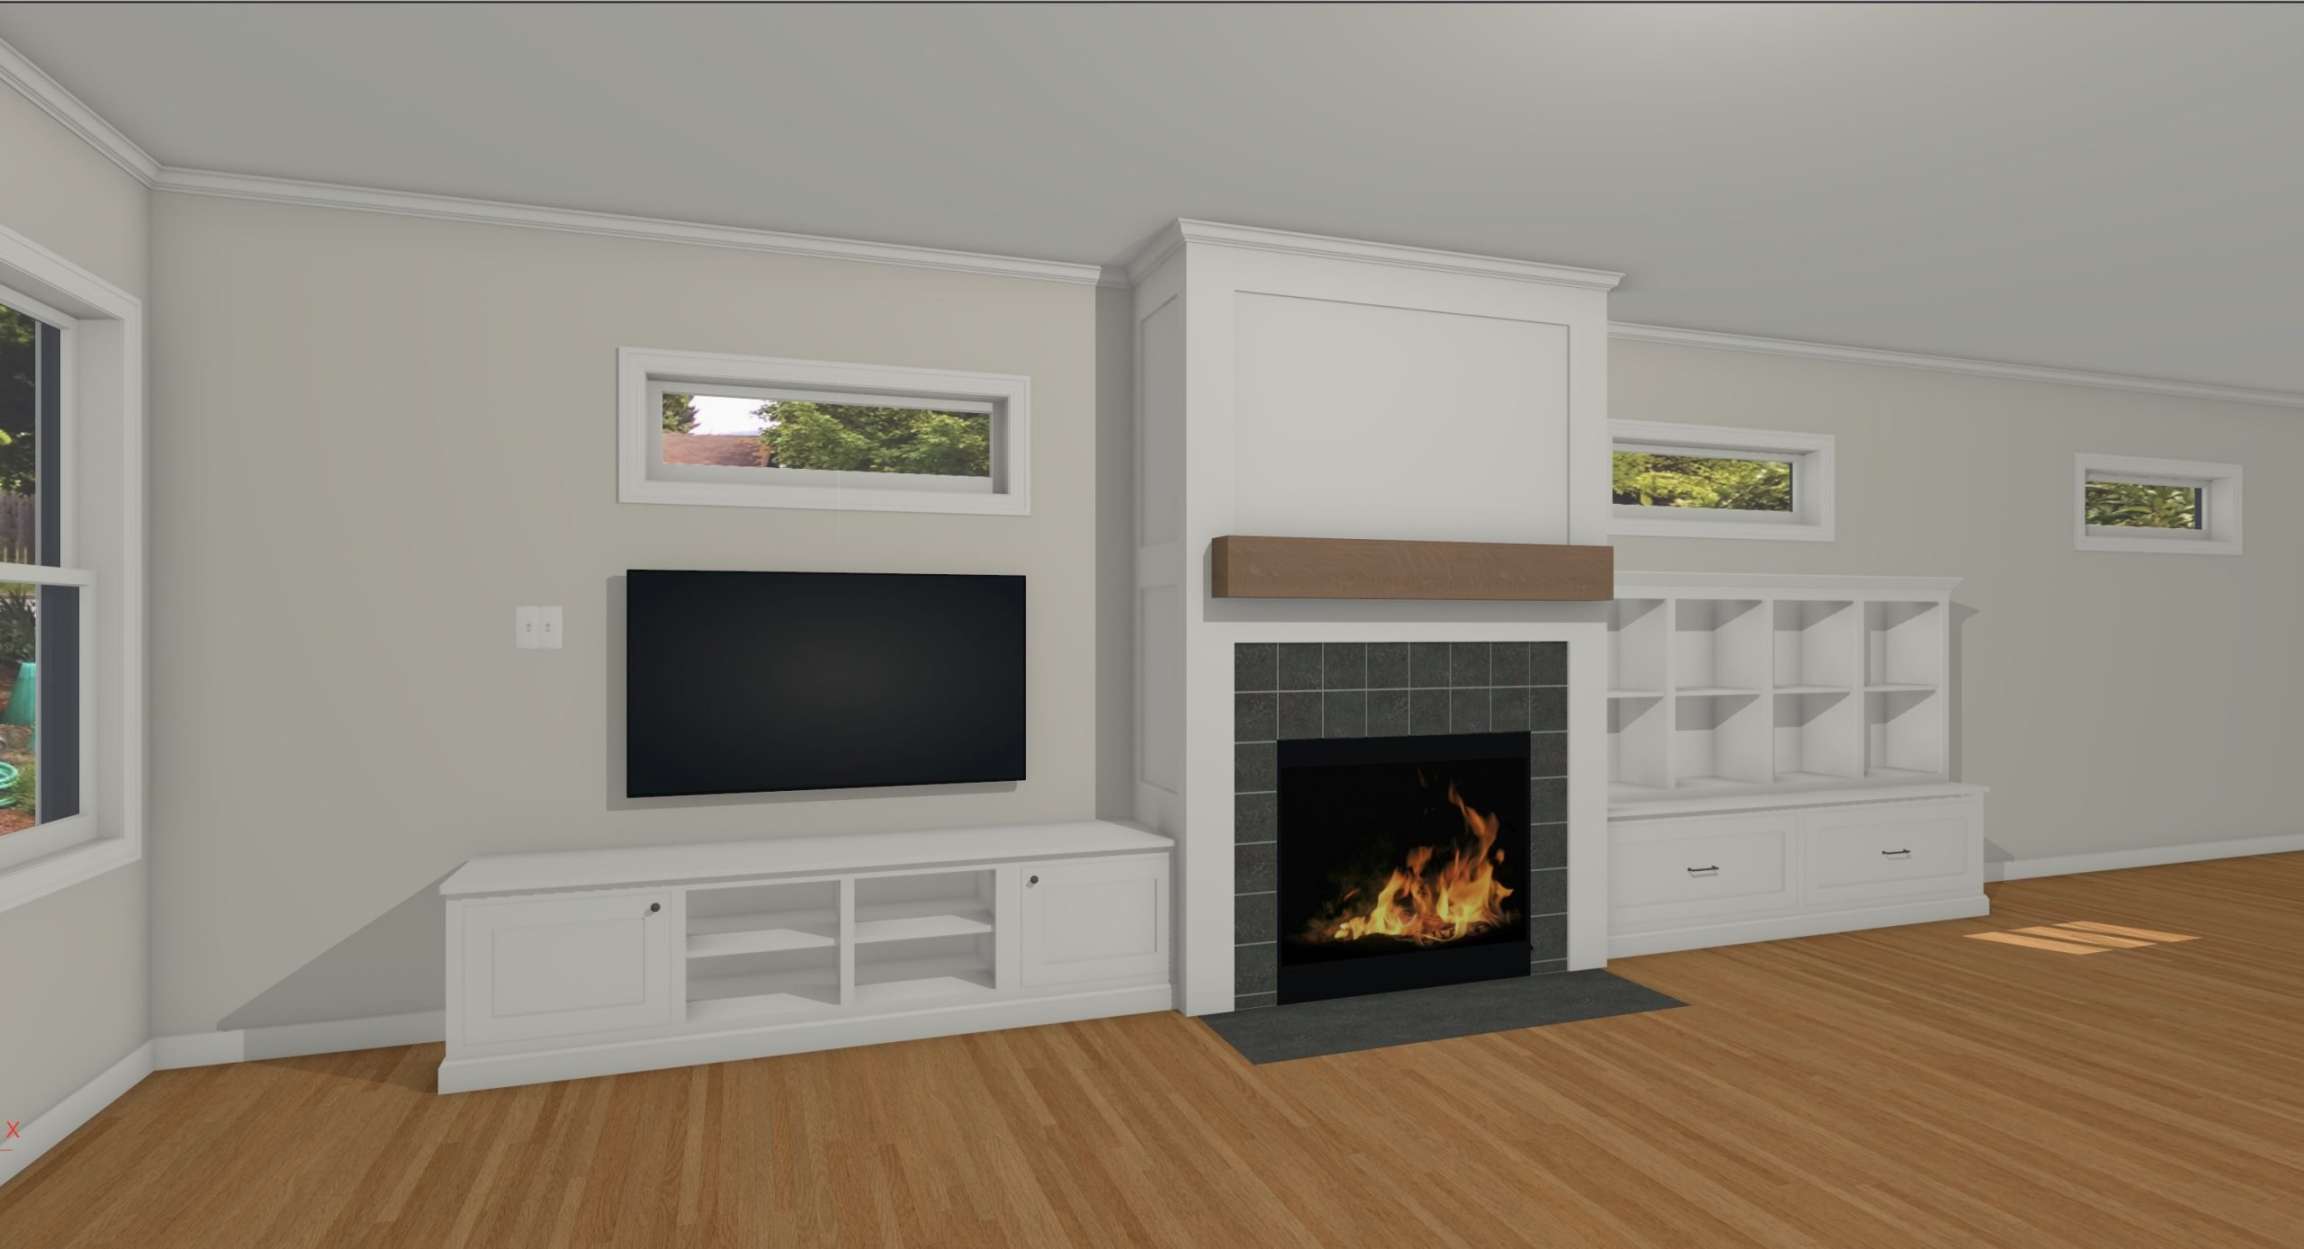 Design Dilemmas: How to Design a Great Room Fireplace Wall with